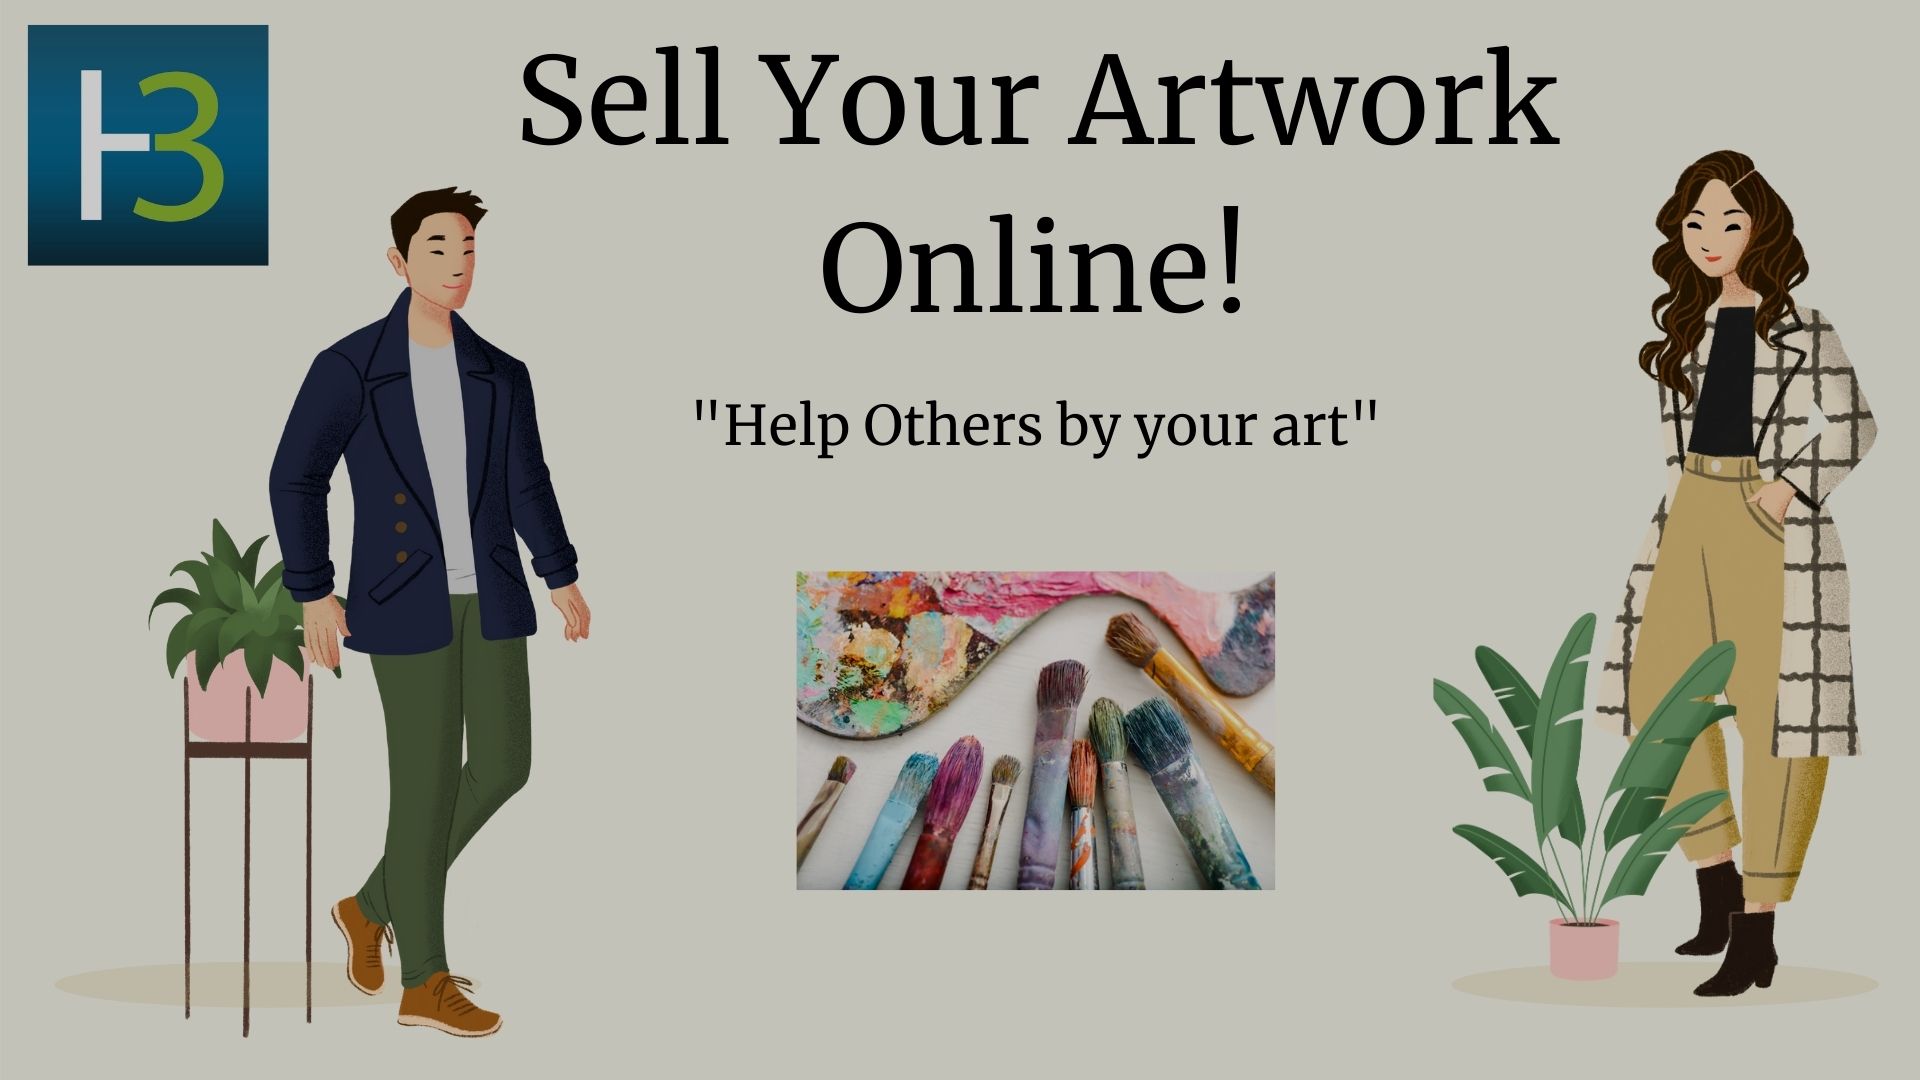 Sell Your Artwork Online